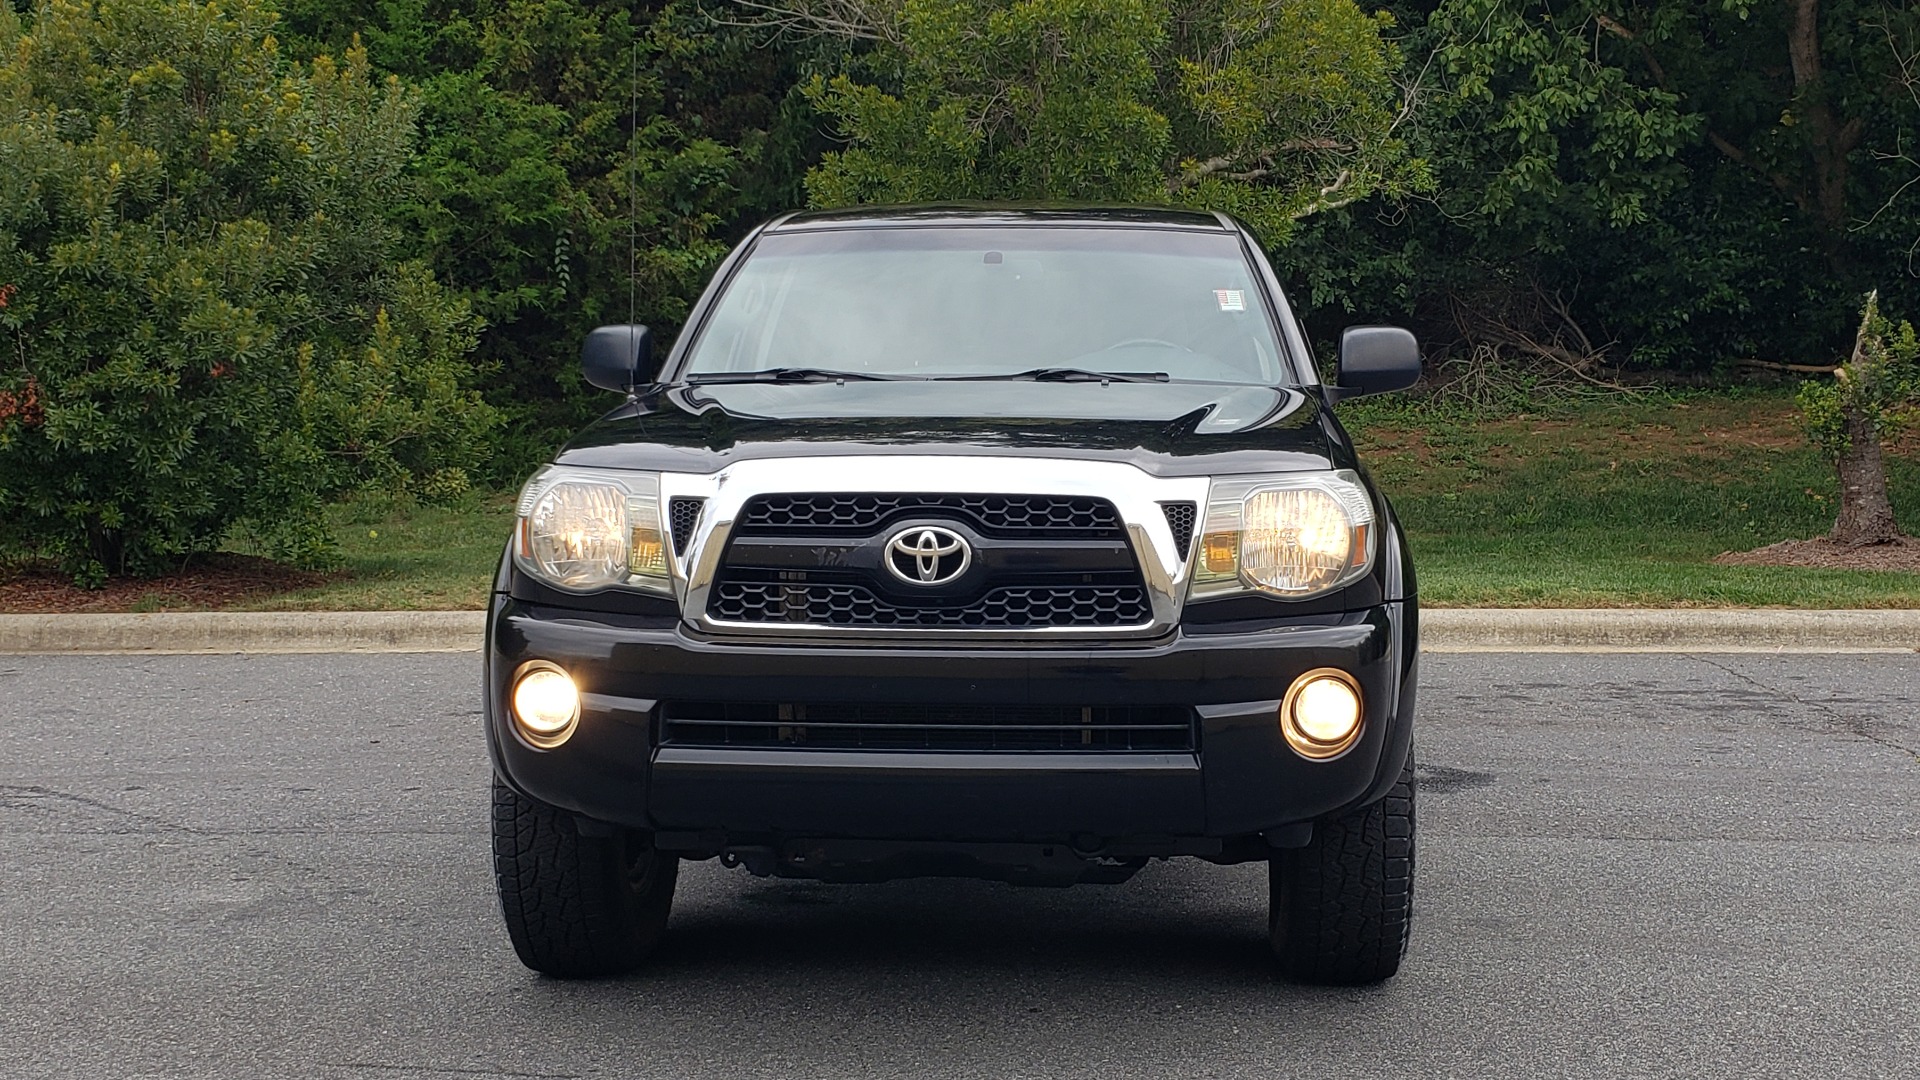 Used 2011 Toyota TACOMA 4WD / 4.0L V6 / 5-SPD AUTO / TRD OFF-ROAD PKG / BED LINER for sale Sold at Formula Imports in Charlotte NC 28227 14